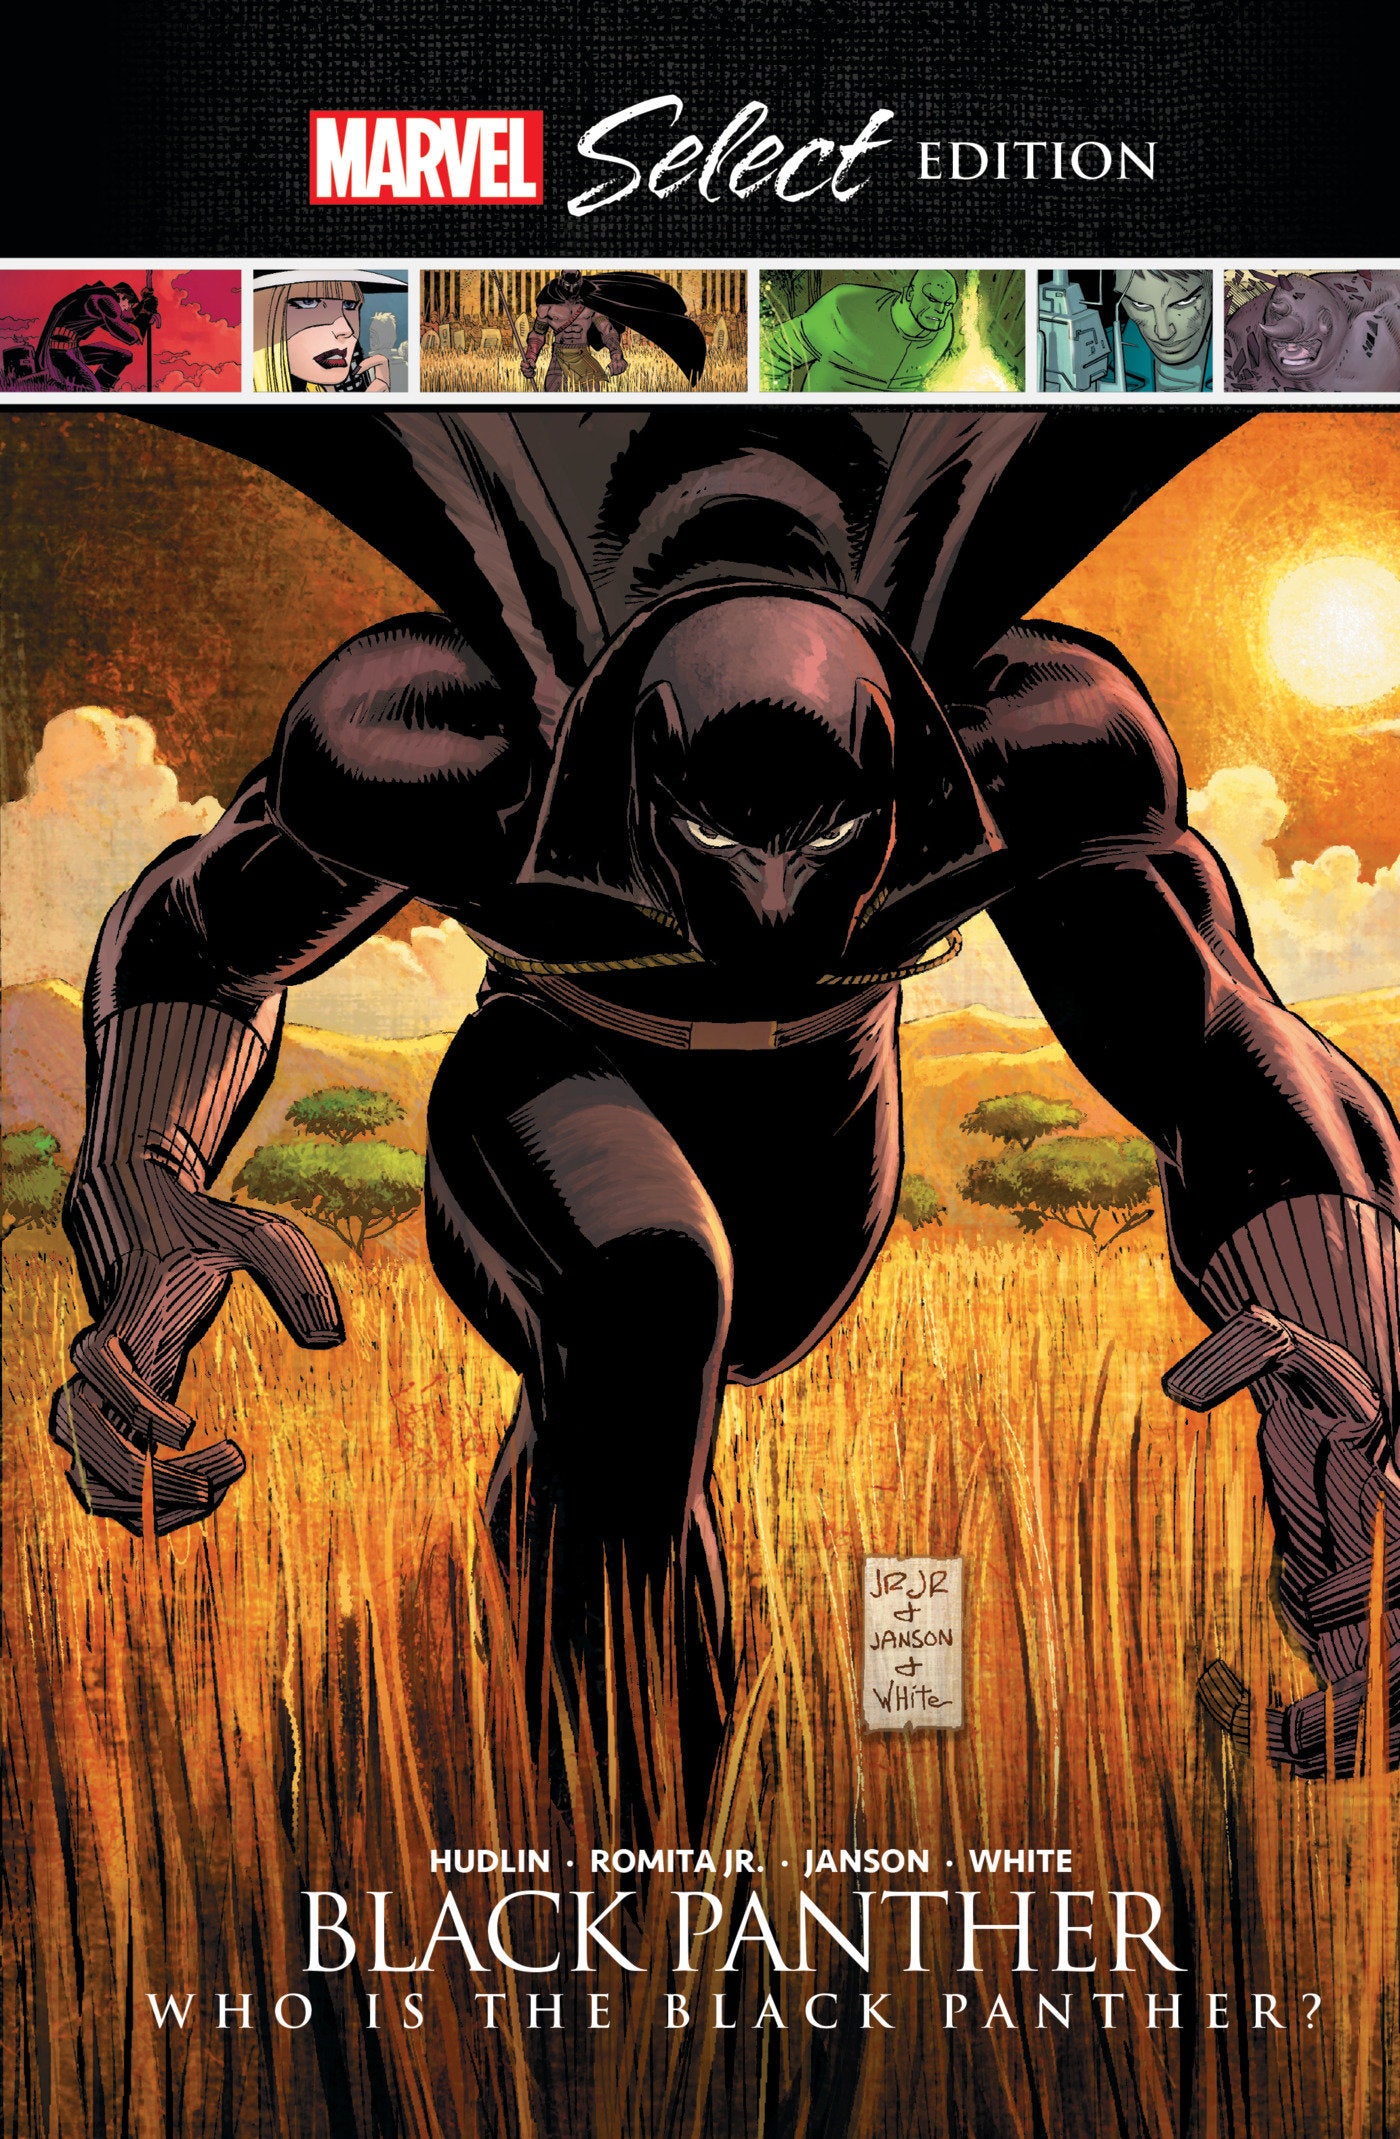 BLACK PANTHER: WHO IS THE BLACK PANTHER? MARVEL SELECT HARDCOVER